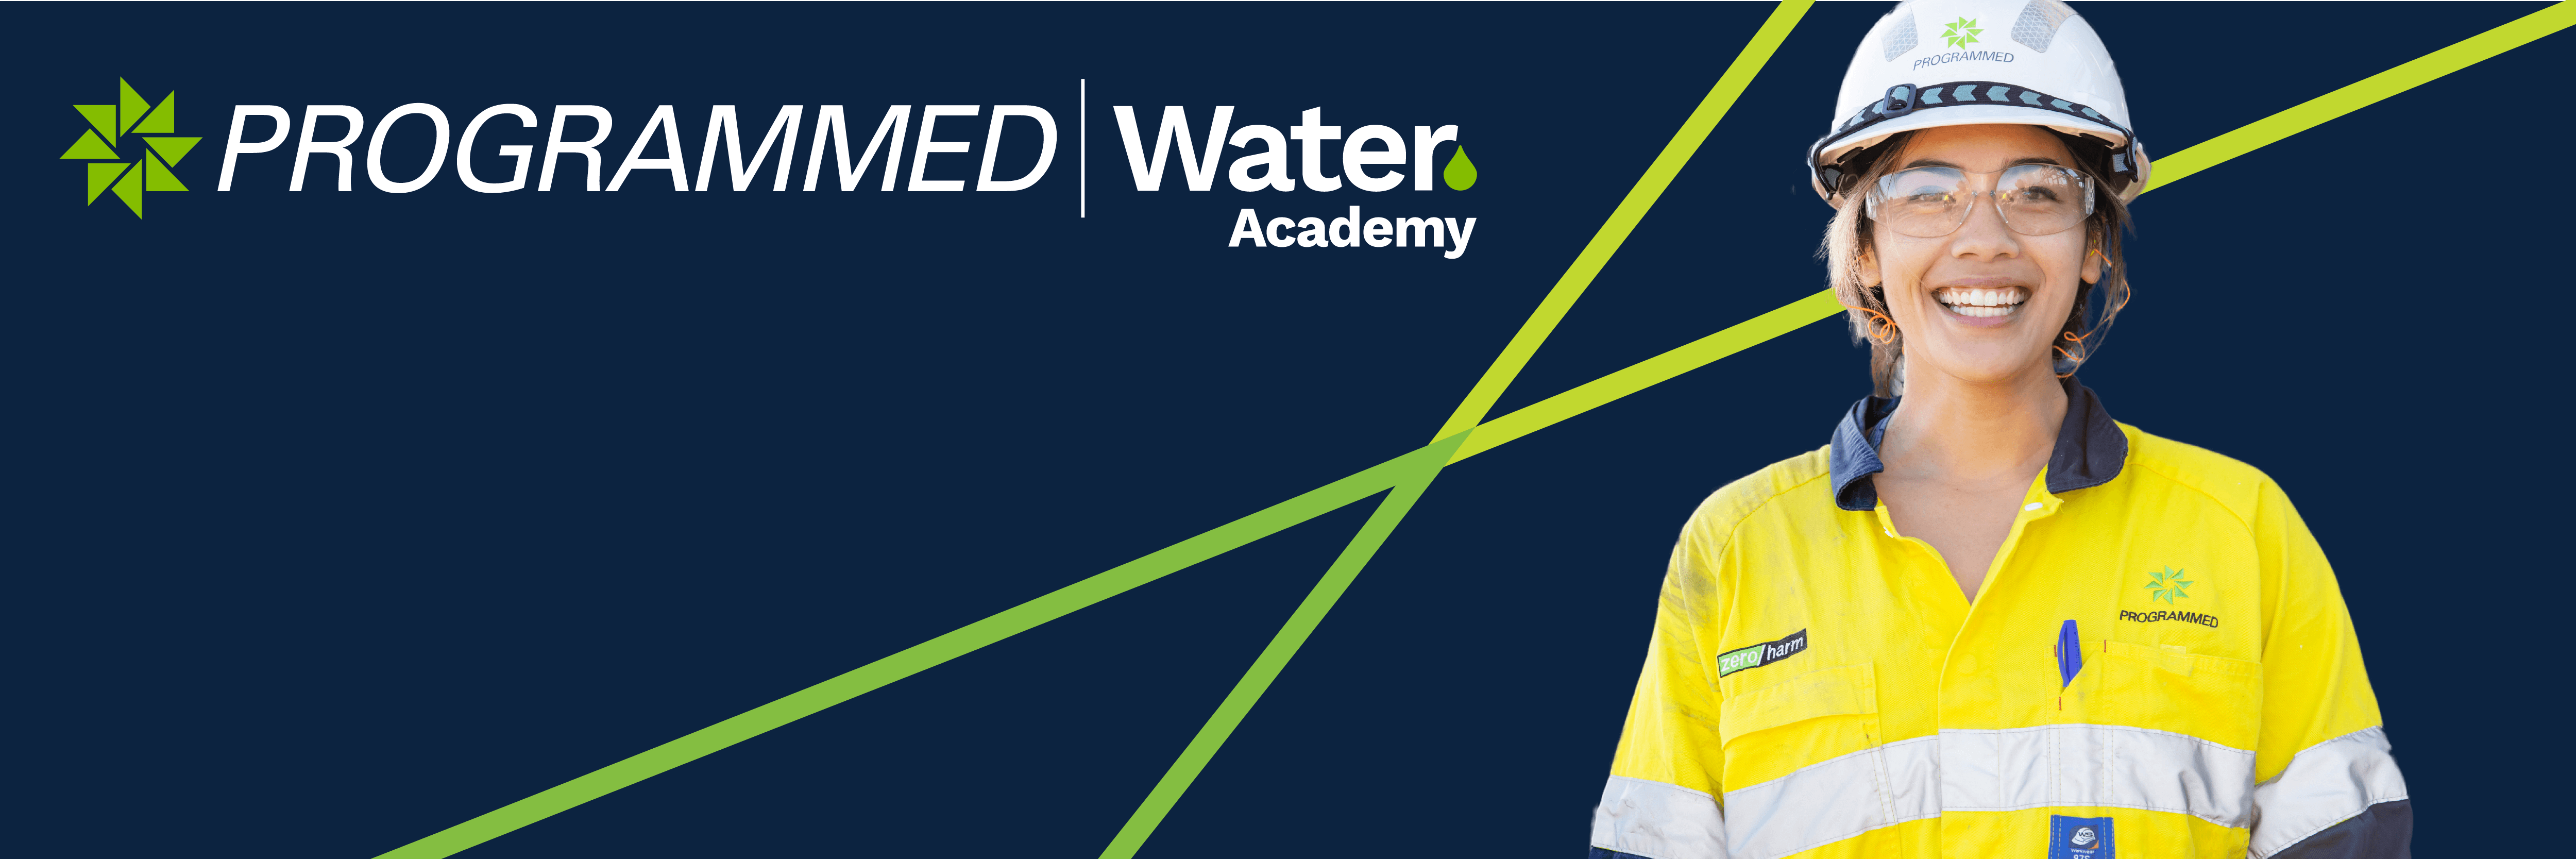 WaterAcademy Story banner